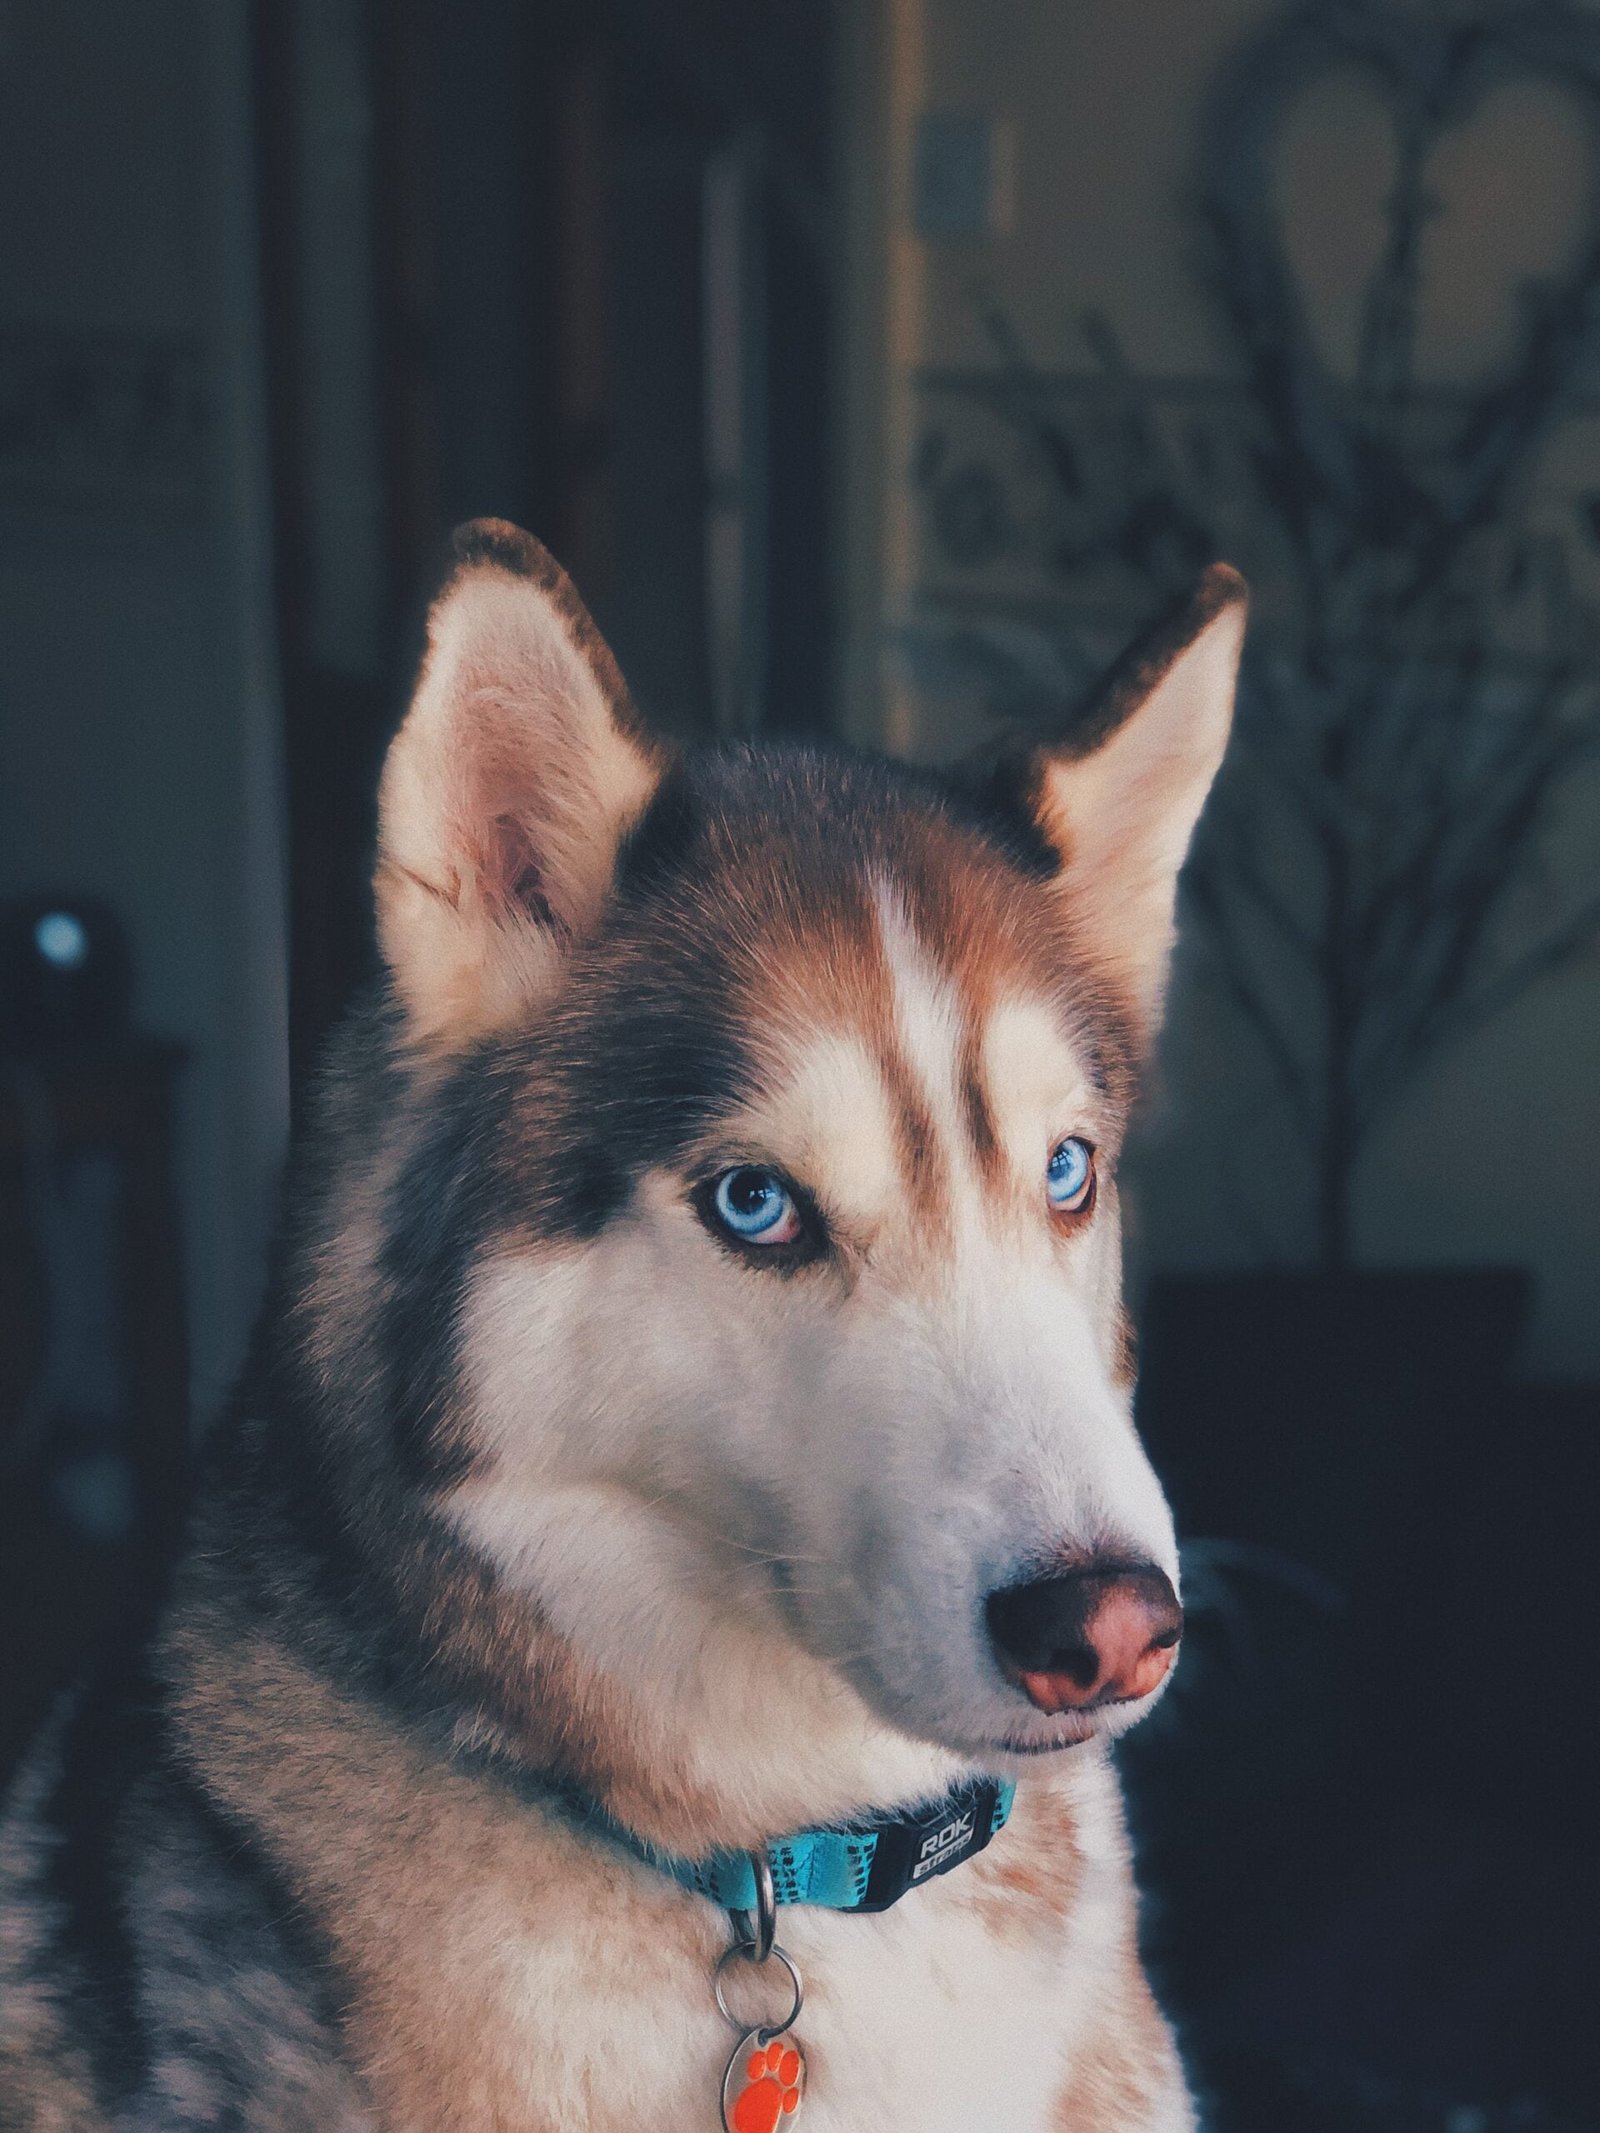 A husky dog with dreamy eyes looking straight into the camera